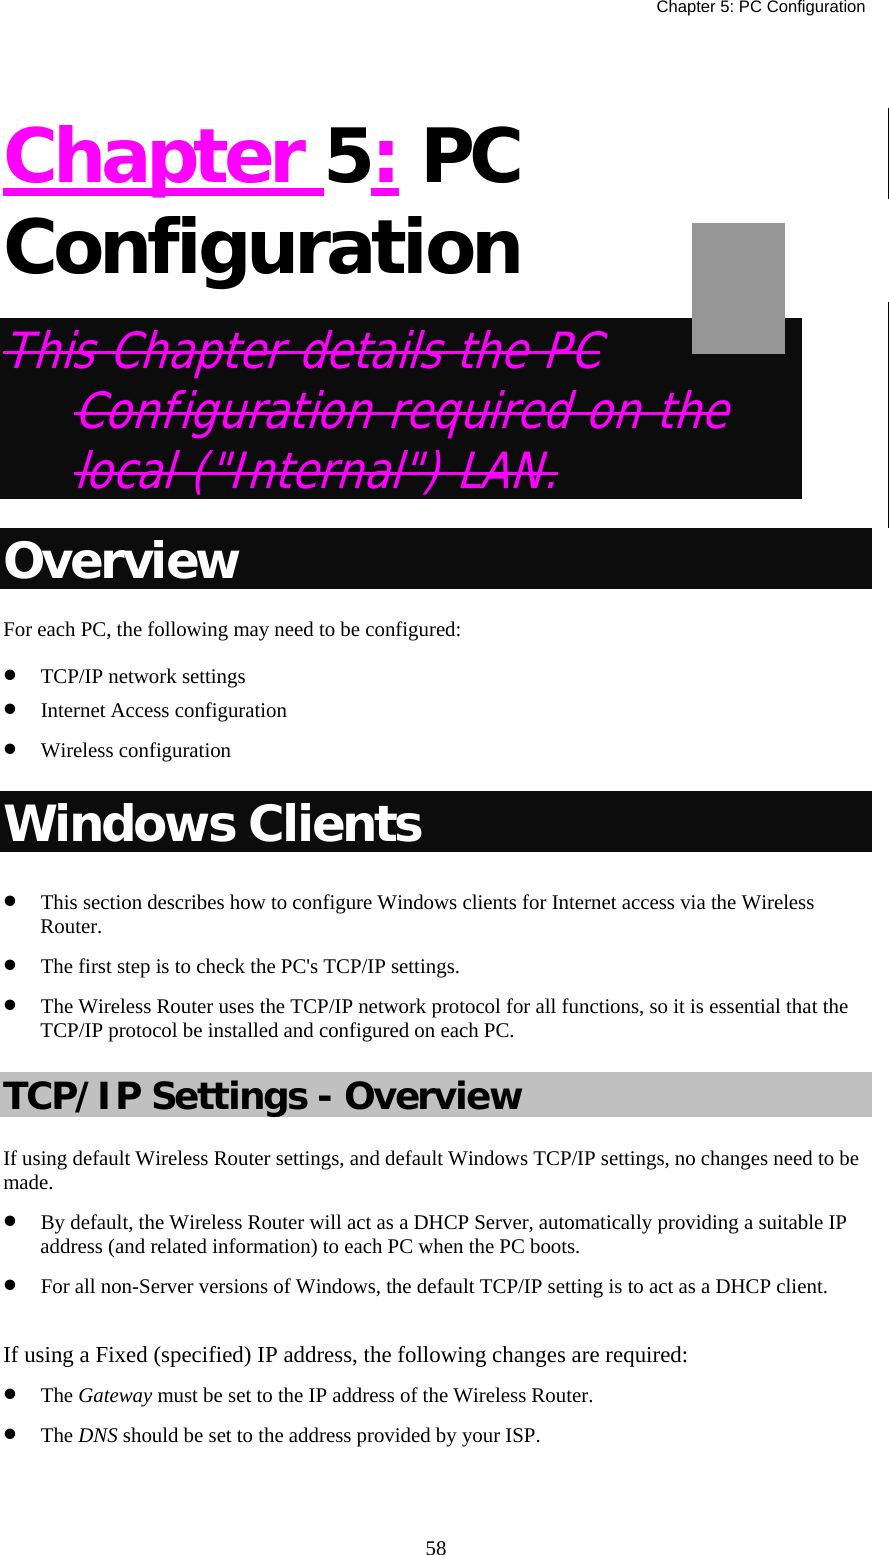   Chapter 5: PC Configuration  58 Chapter 5: PC Configuration This Chapter details the PC Configuration required on the local (&quot;Internal&quot;) LAN. Overview For each PC, the following may need to be configured: •  TCP/IP network settings •  Internet Access configuration •  Wireless configuration Windows Clients •  This section describes how to configure Windows clients for Internet access via the Wireless Router. •  The first step is to check the PC&apos;s TCP/IP settings.  •  The Wireless Router uses the TCP/IP network protocol for all functions, so it is essential that the TCP/IP protocol be installed and configured on each PC. TCP/IP Settings - Overview If using default Wireless Router settings, and default Windows TCP/IP settings, no changes need to be made. •  By default, the Wireless Router will act as a DHCP Server, automatically providing a suitable IP address (and related information) to each PC when the PC boots. •  For all non-Server versions of Windows, the default TCP/IP setting is to act as a DHCP client.  If using a Fixed (specified) IP address, the following changes are required: •  The Gateway must be set to the IP address of the Wireless Router. •  The DNS should be set to the address provided by your ISP.   